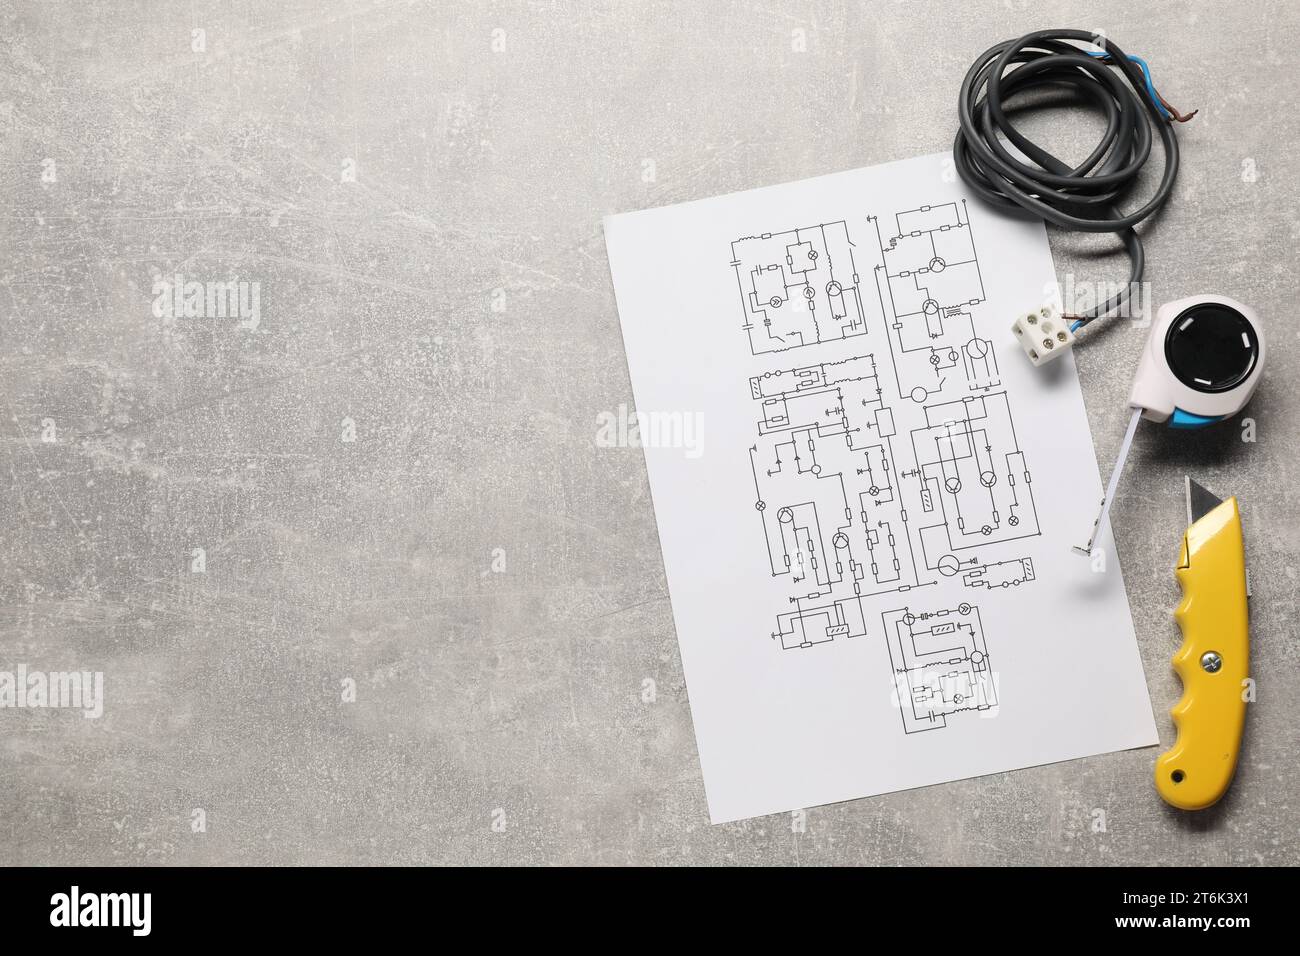 Wiring diagram, wires and tools on grey table, flat lay. Space for text Stock Photo